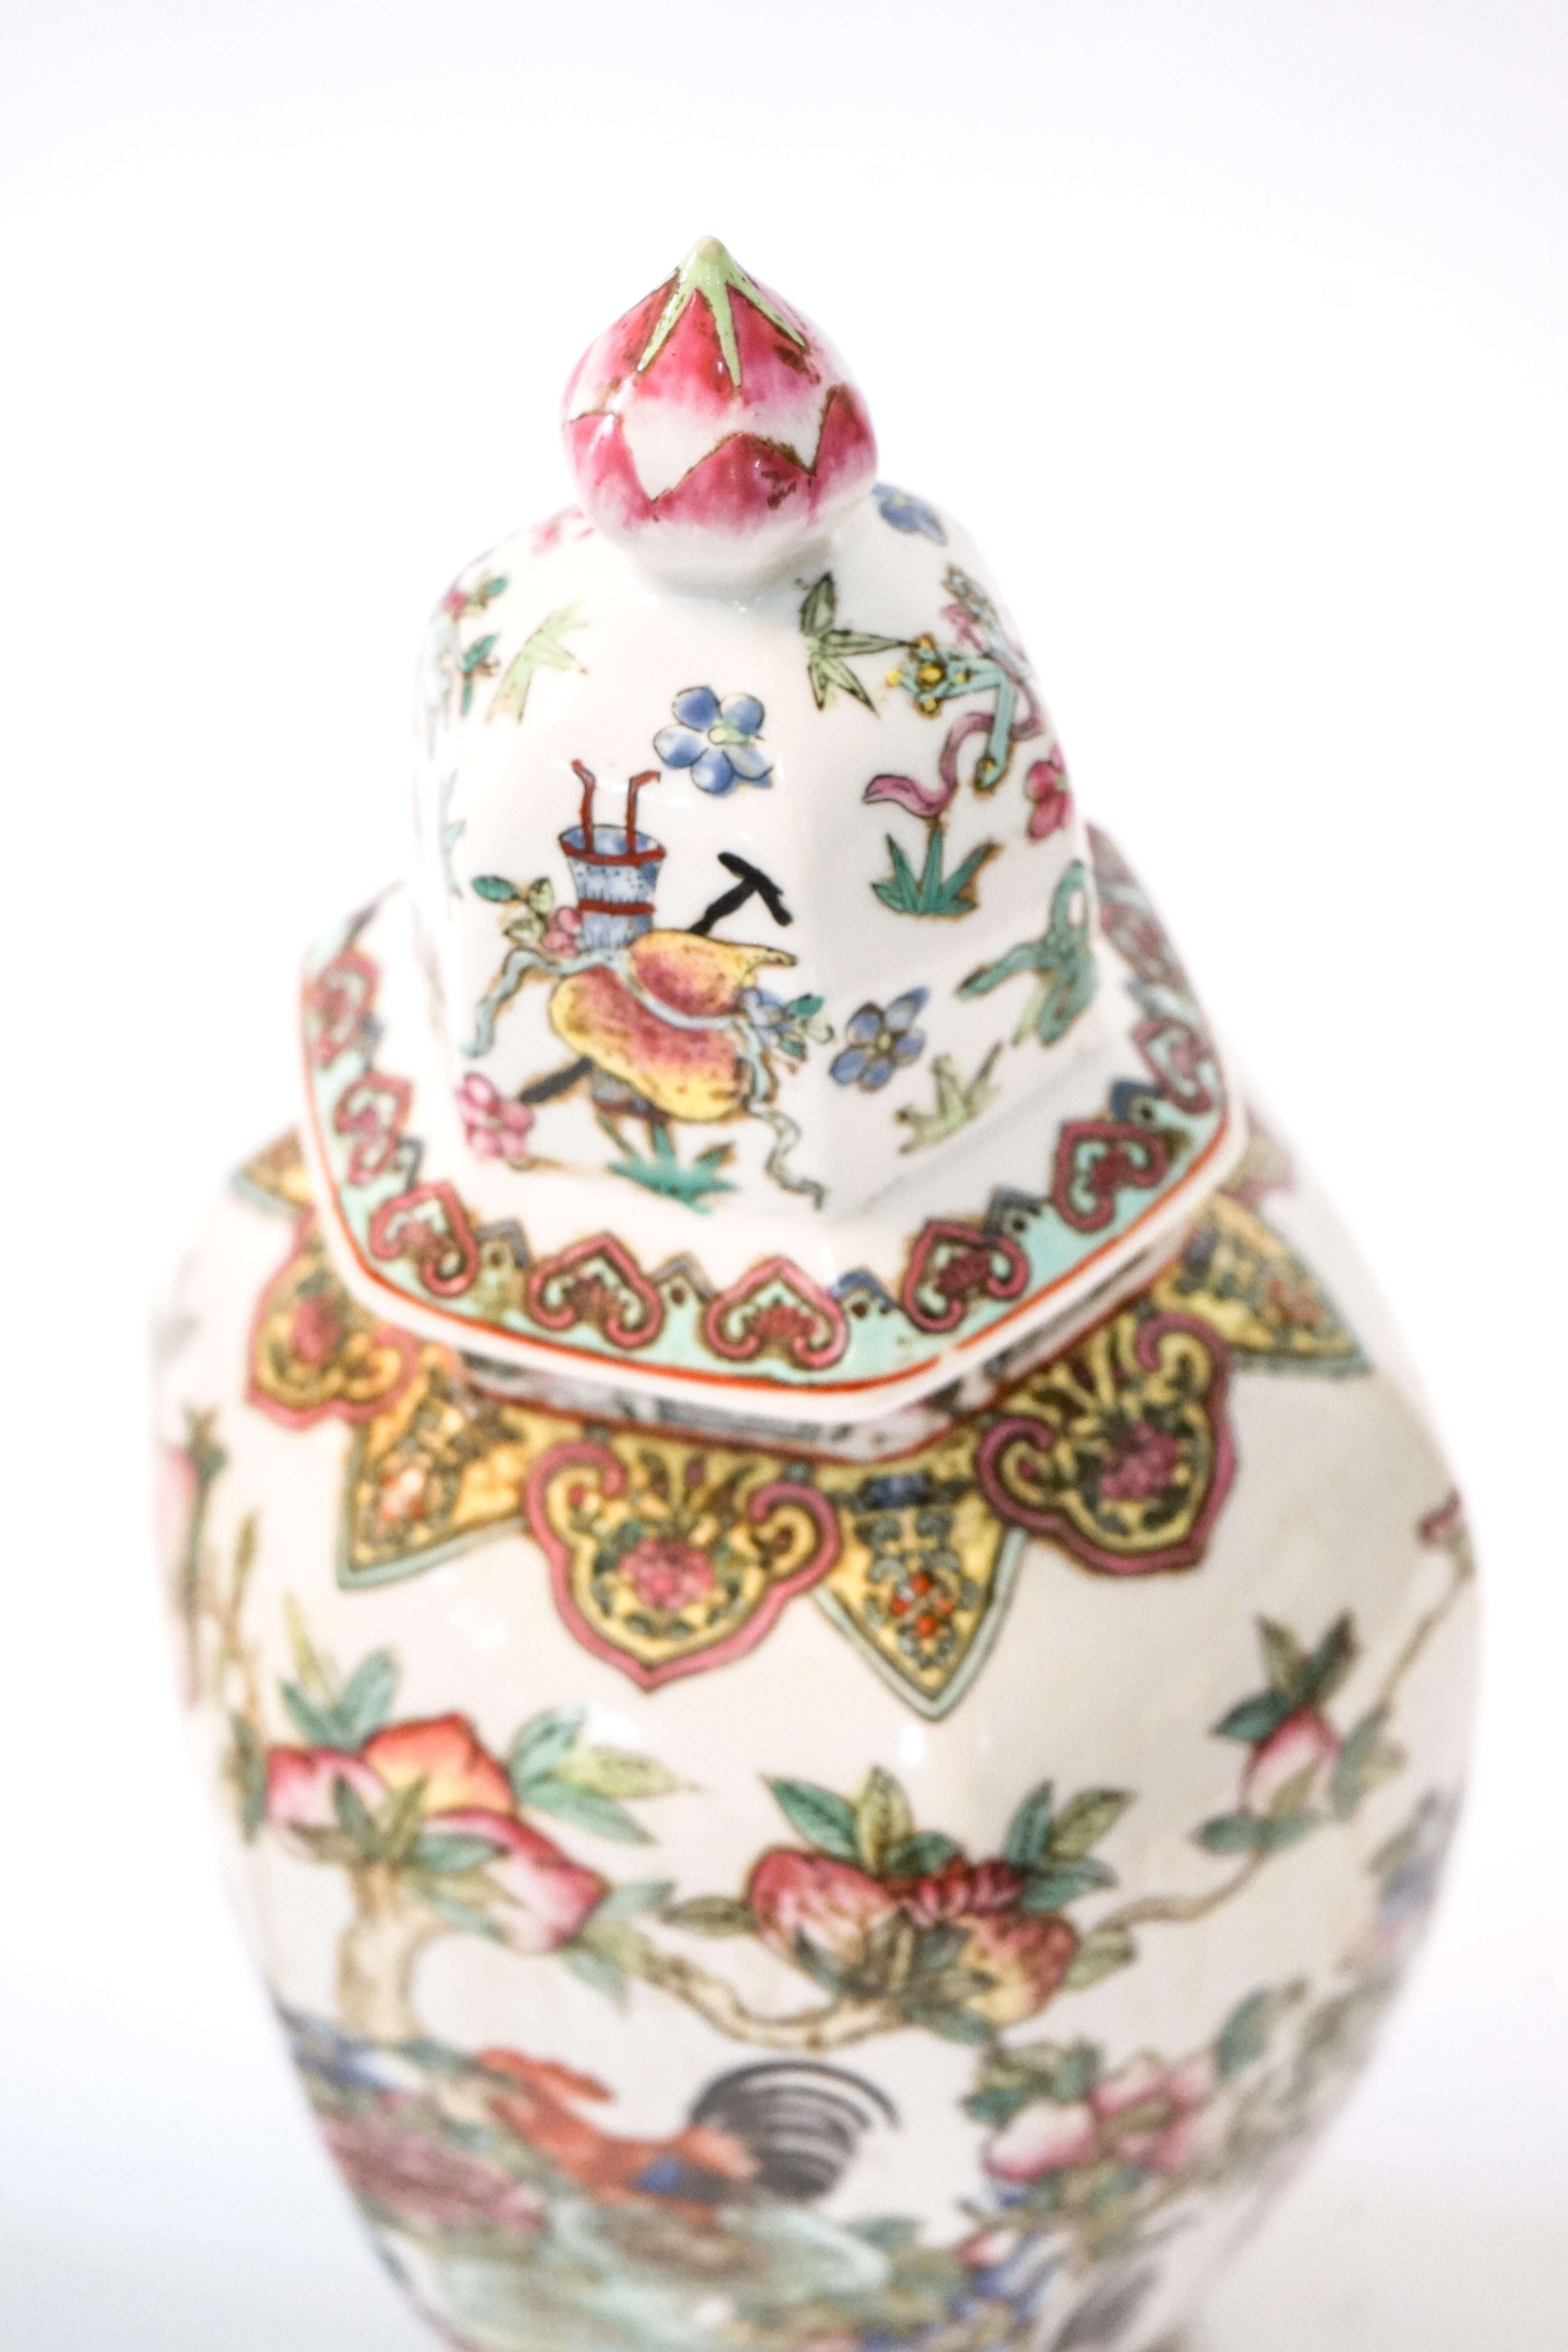 This decorative pair of porcelain jars is adorned with roosters and flowers. Originated from China, circa 1950.